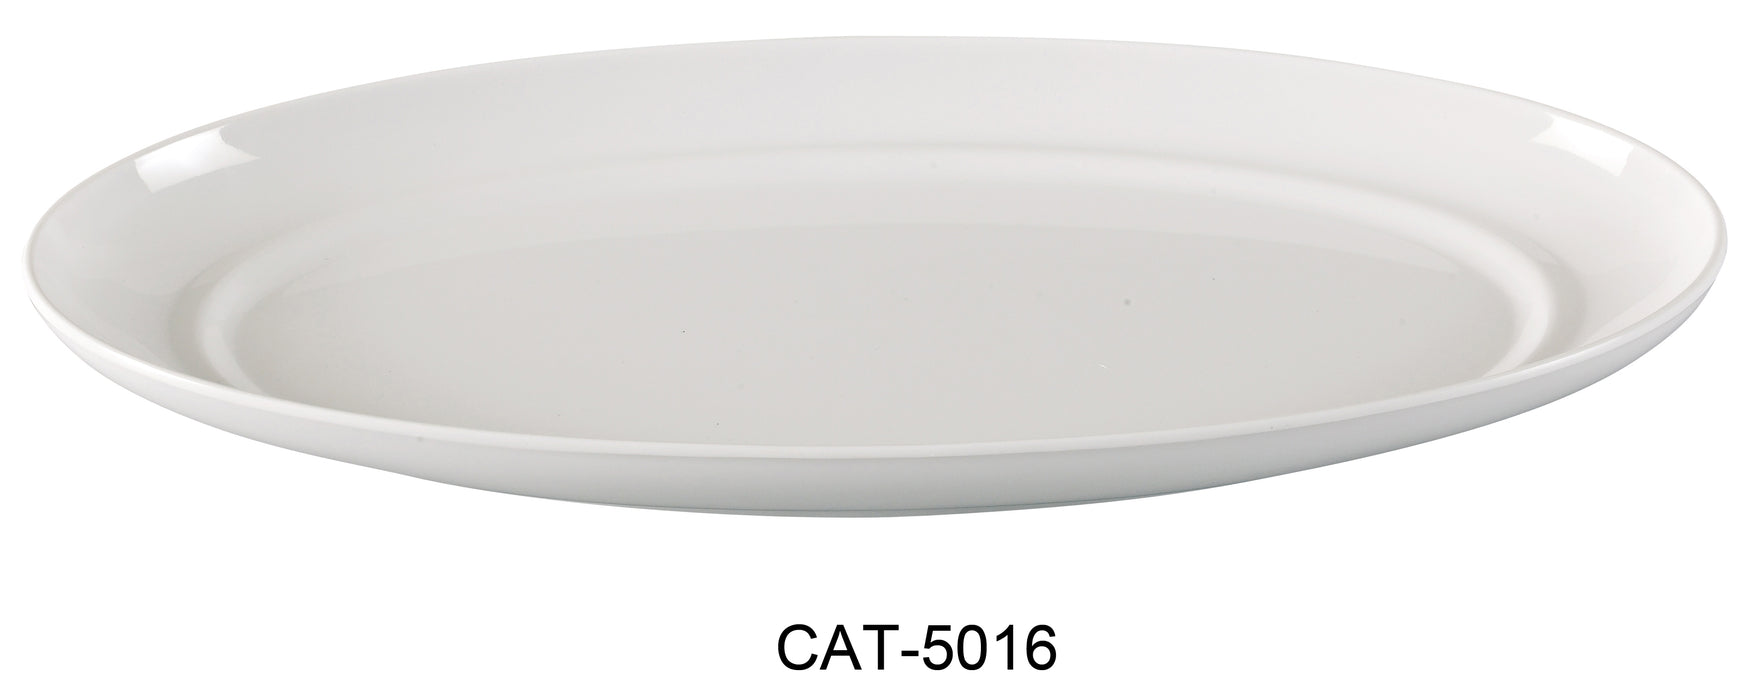 Yanco CAT-5016 Catering Deep Platter, Shape: Oval, Color: White, Material: Melamine, Pack of 12